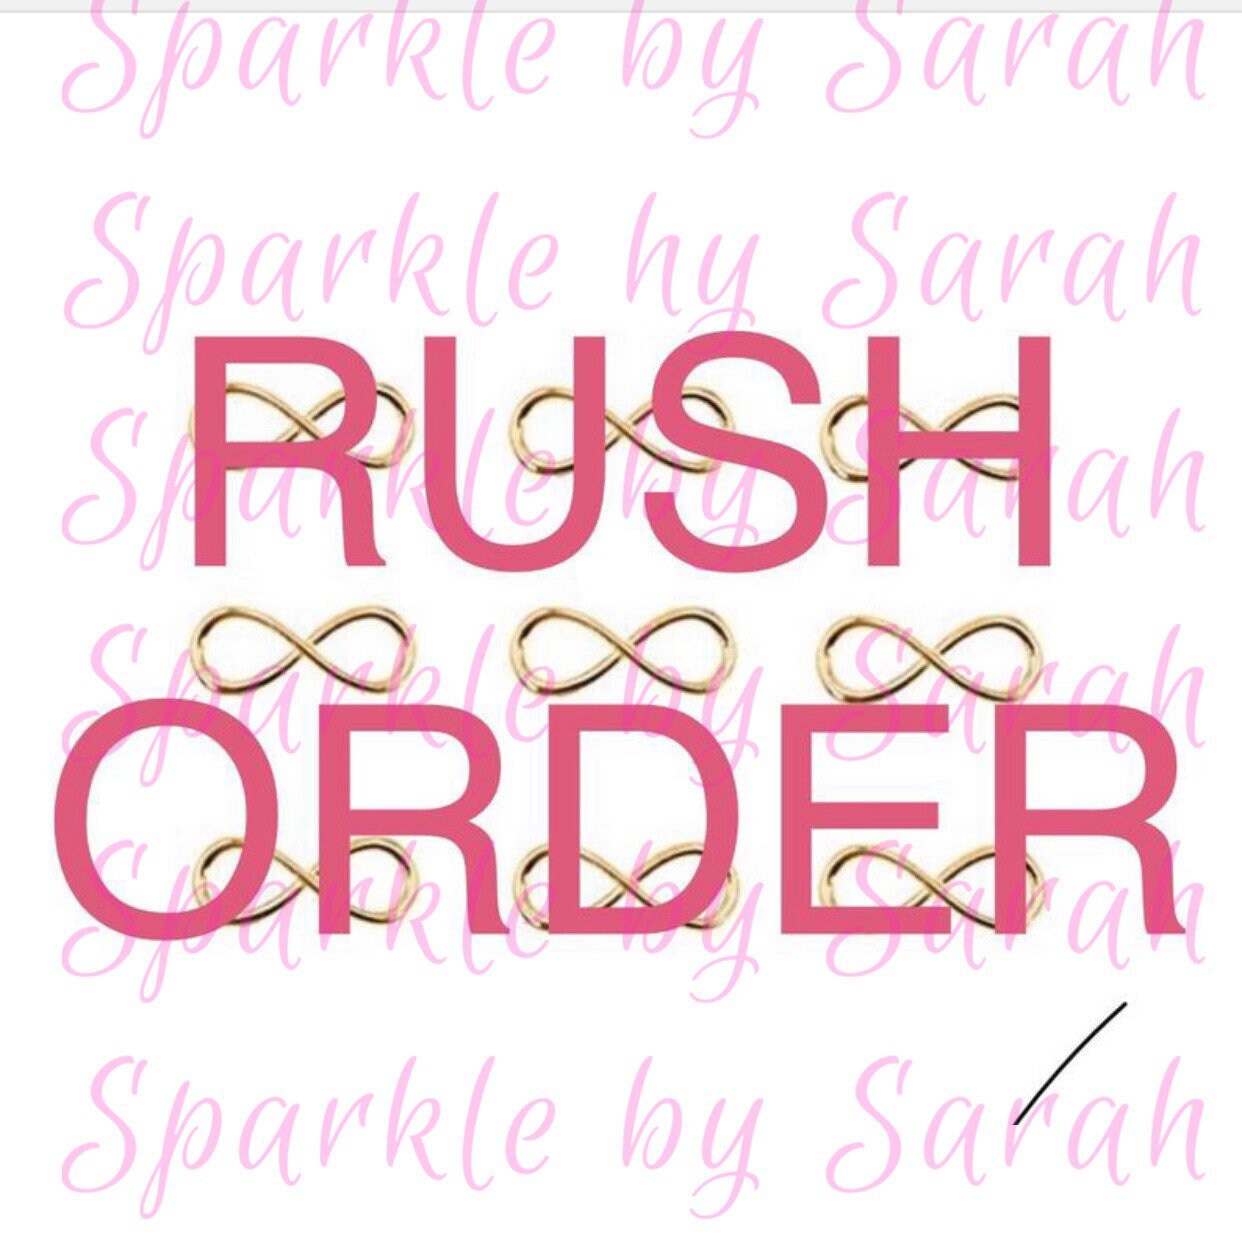 RUSH ORDER Cheer shoe charm , team gift , competition gifts , Shoe